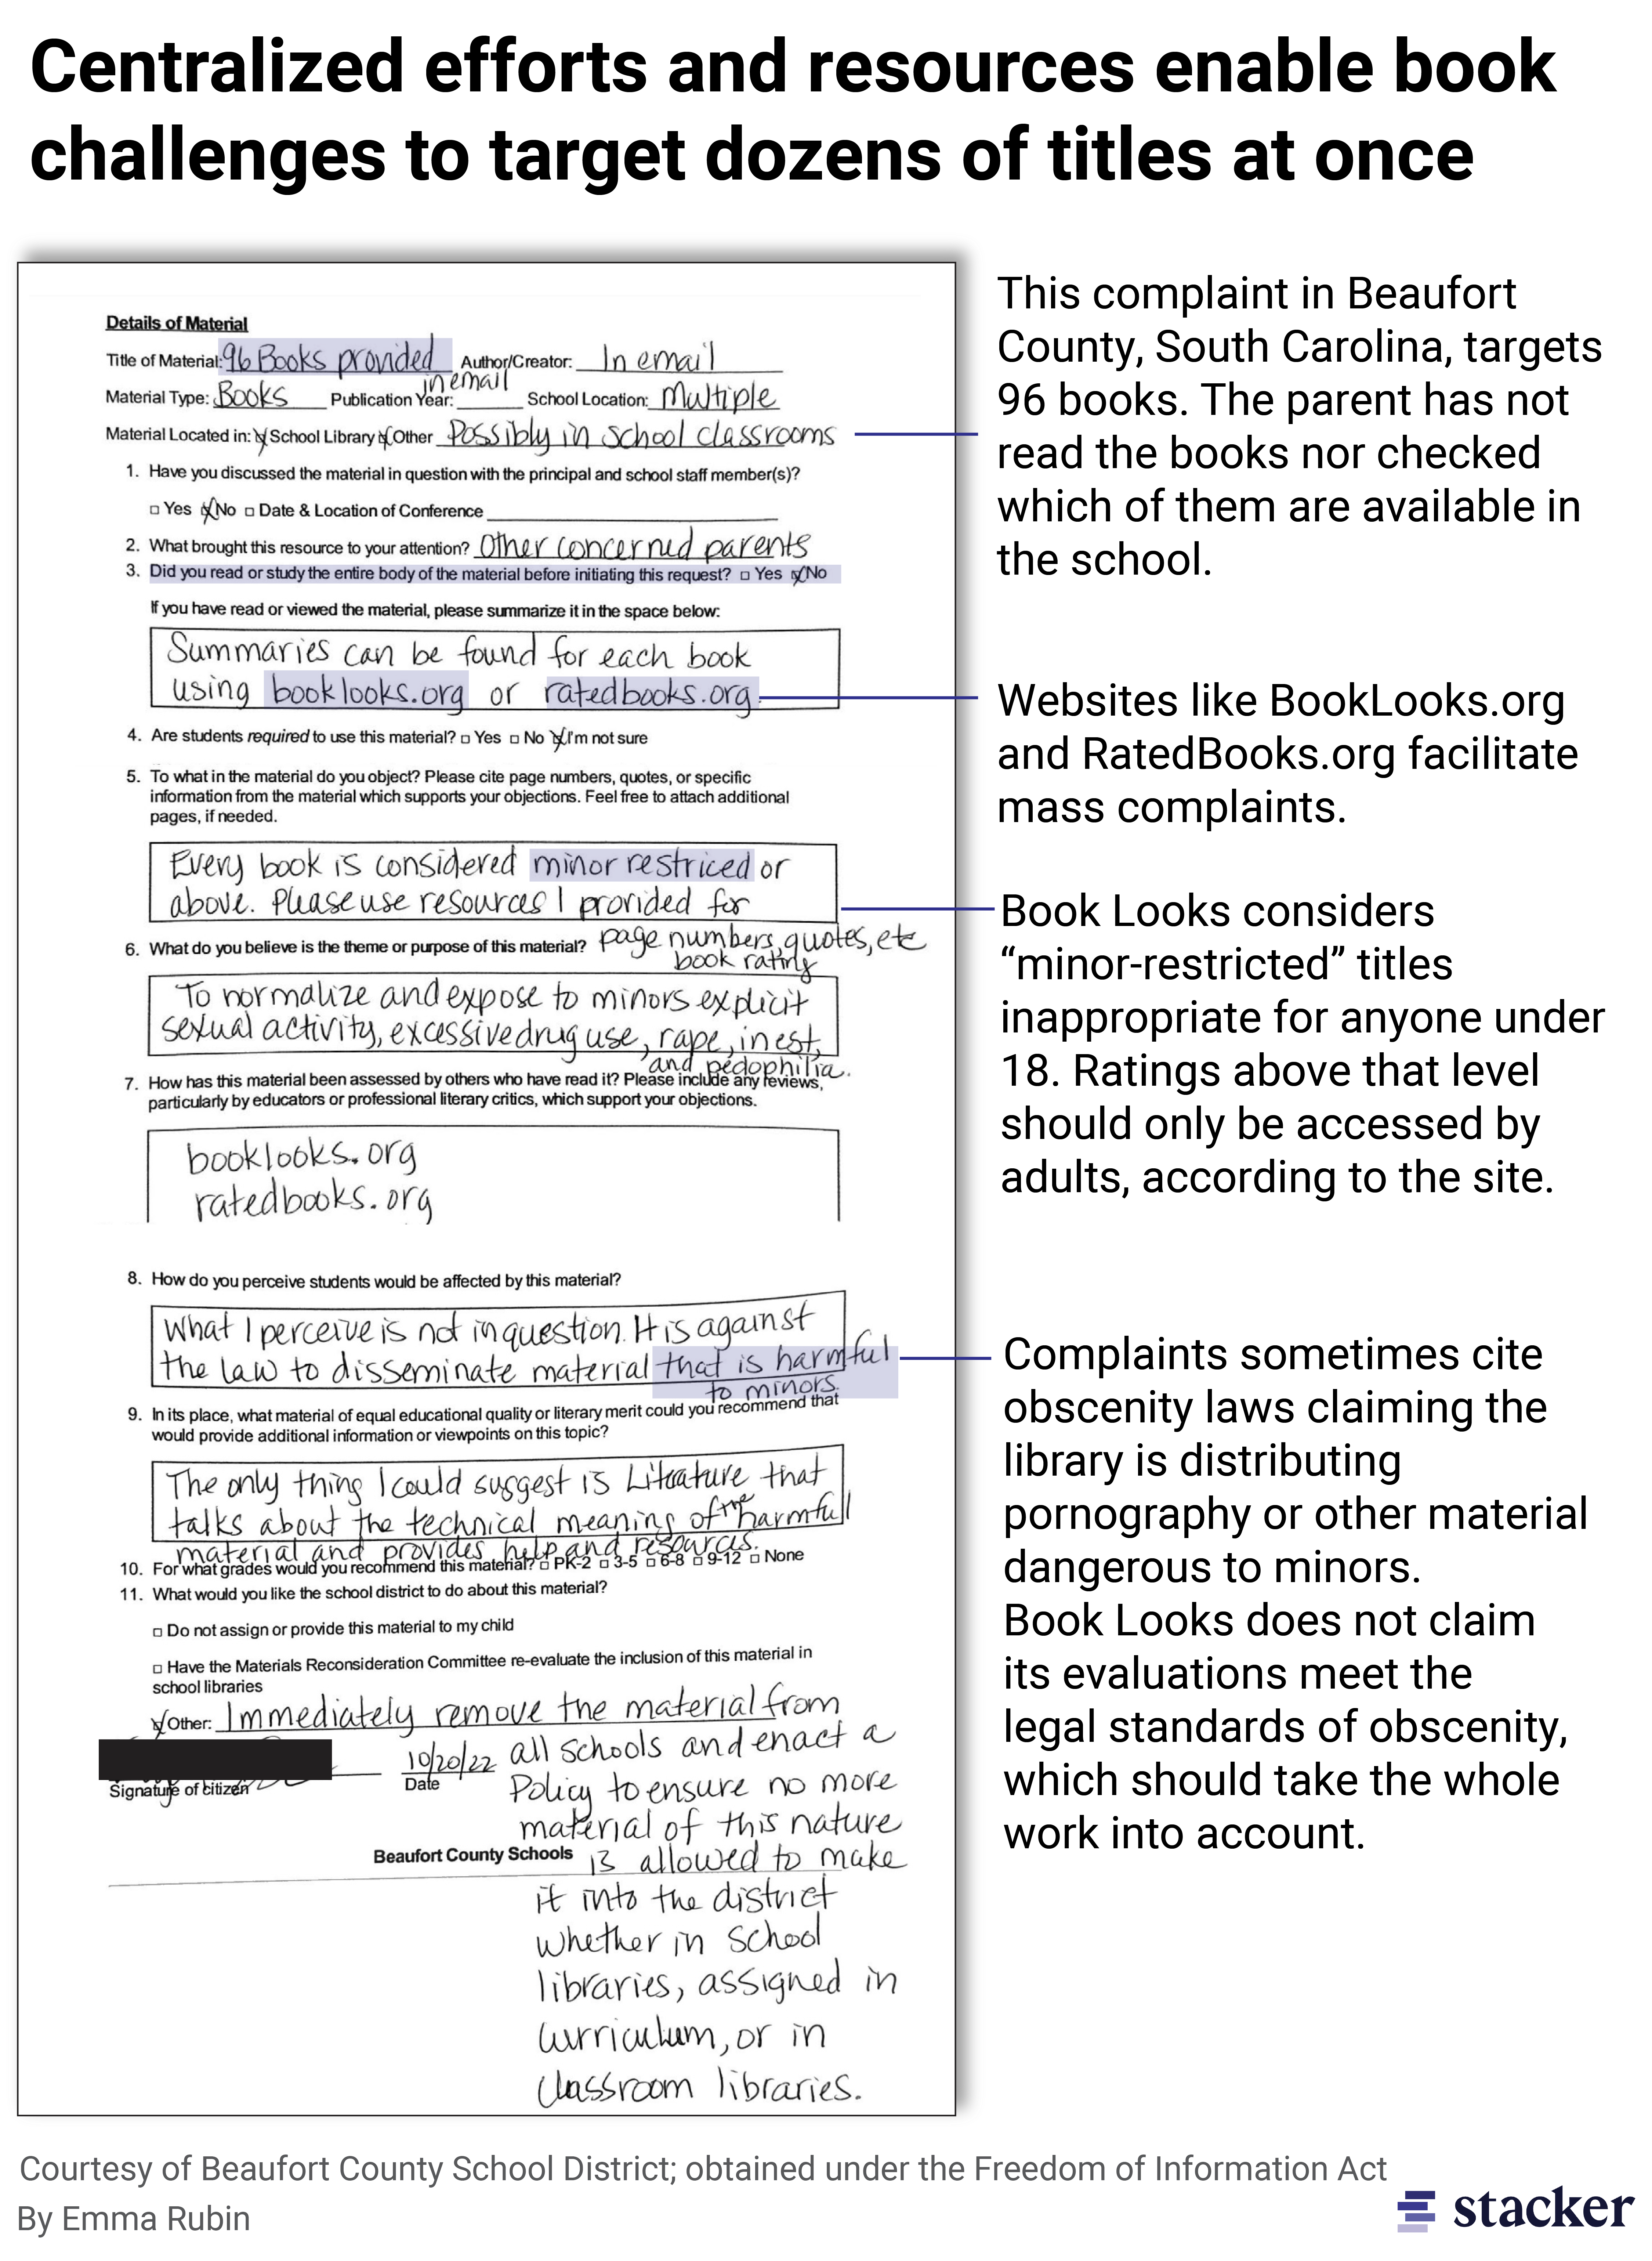 Annotated document of a complaint submitted to Beaufort County School District in South Carolina. It targets 96 books, and the parent has not read the books nor checked which of them are available in the school. 